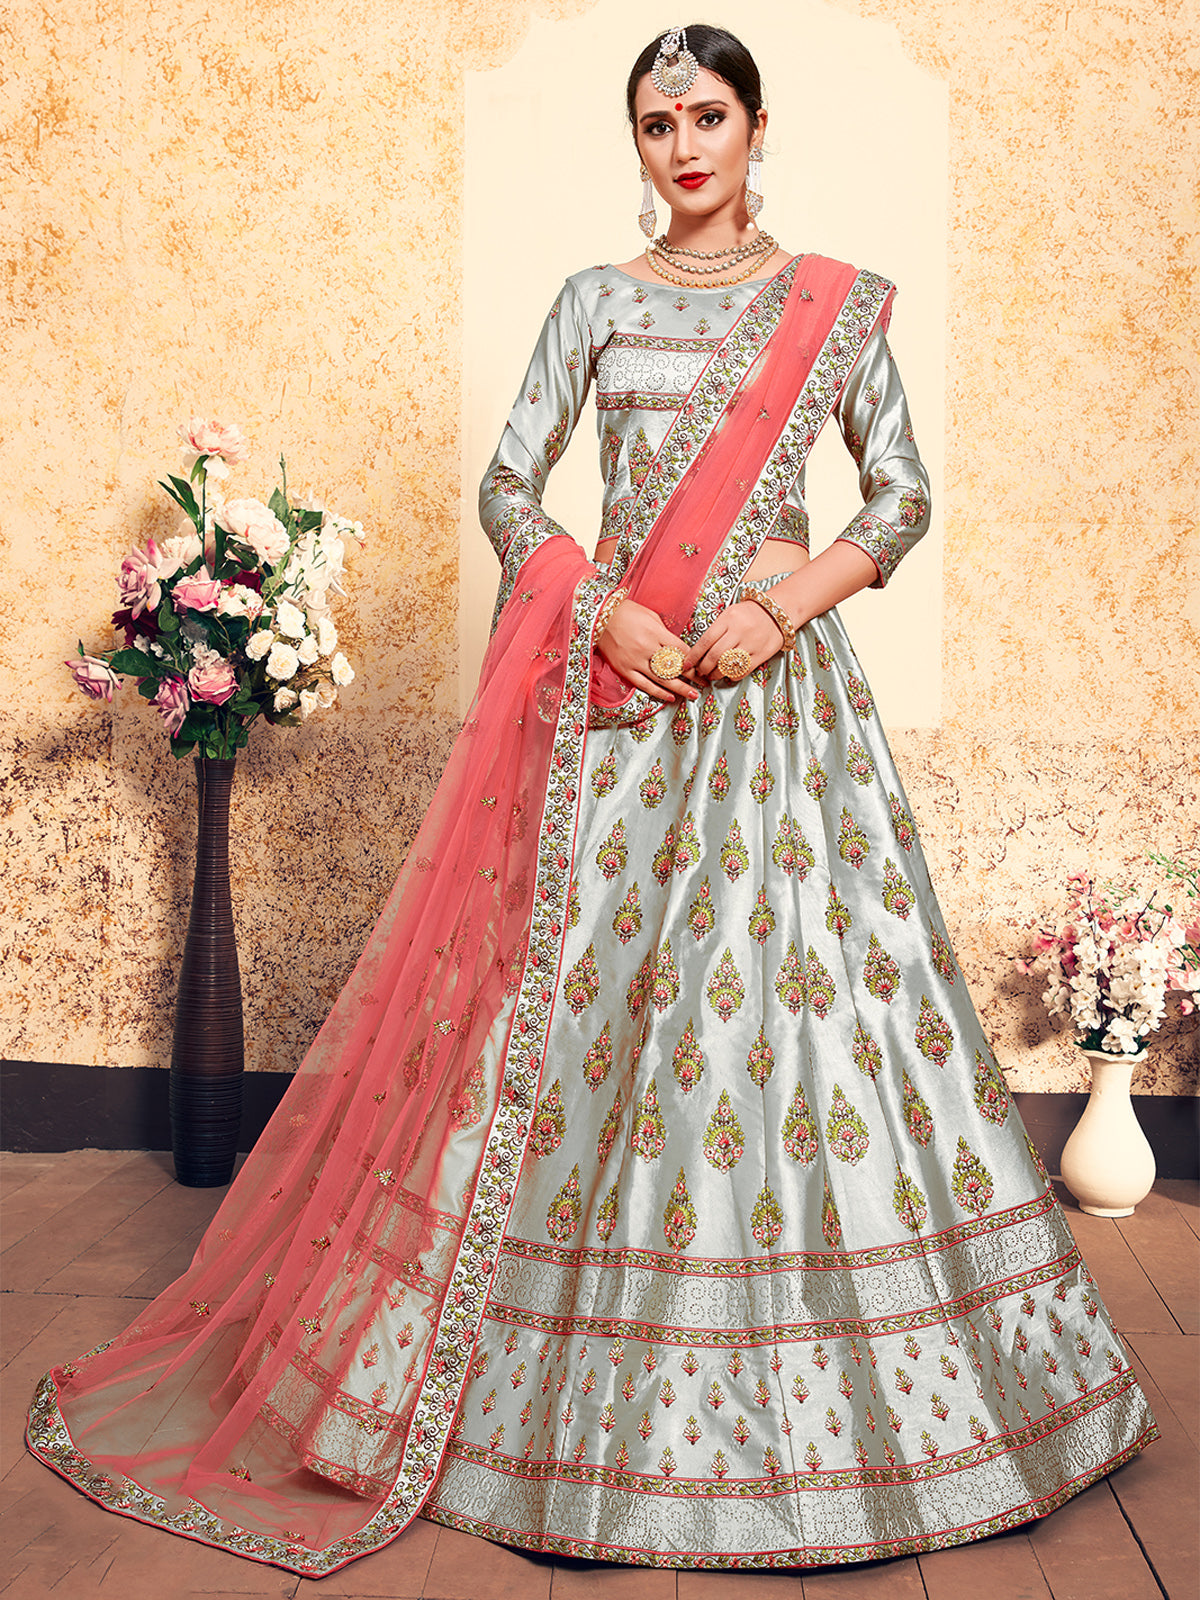 Ruby Red Lehenga Set with Self Embroidery, Matching Dupatta & Frill Details  - Seasons India